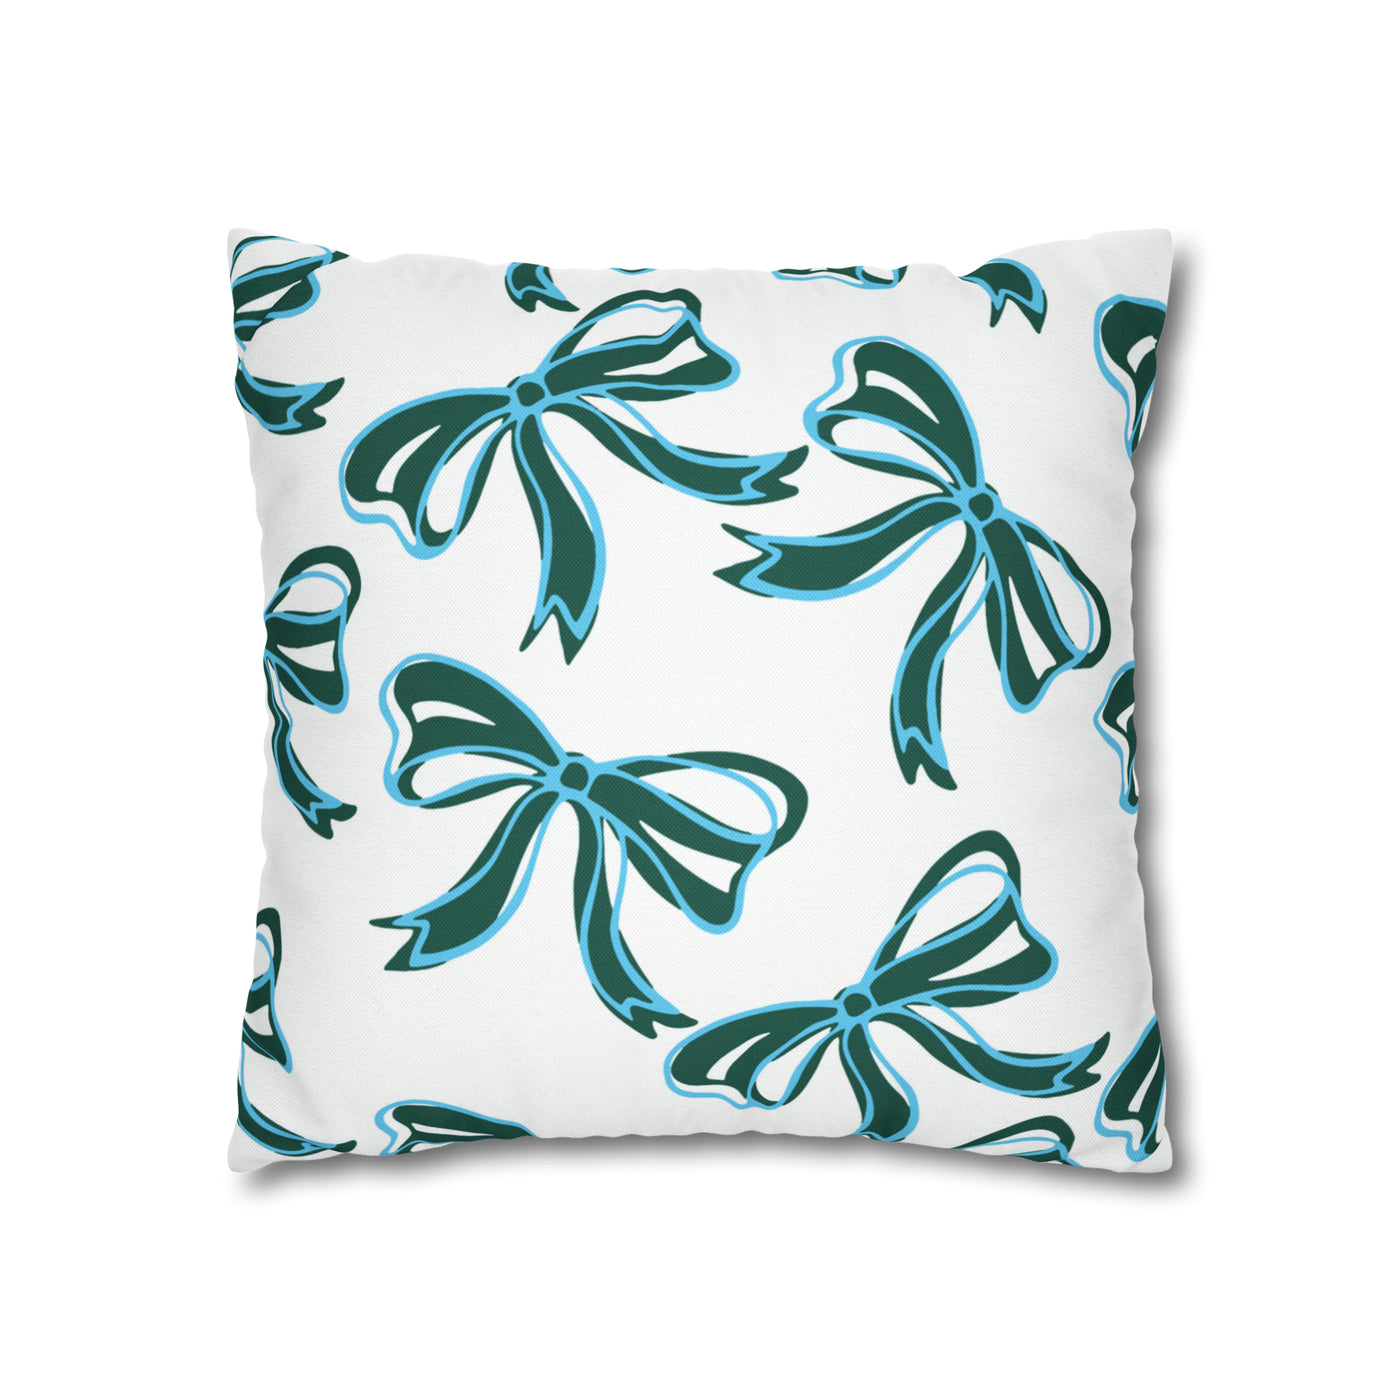 Trendy Bow College Pillow Cover - Dorm Pillow, Graduation Gift, Bed Party Gift, Acceptance Gift, College Gift, Tulane,Roll Wave,Blue & Green